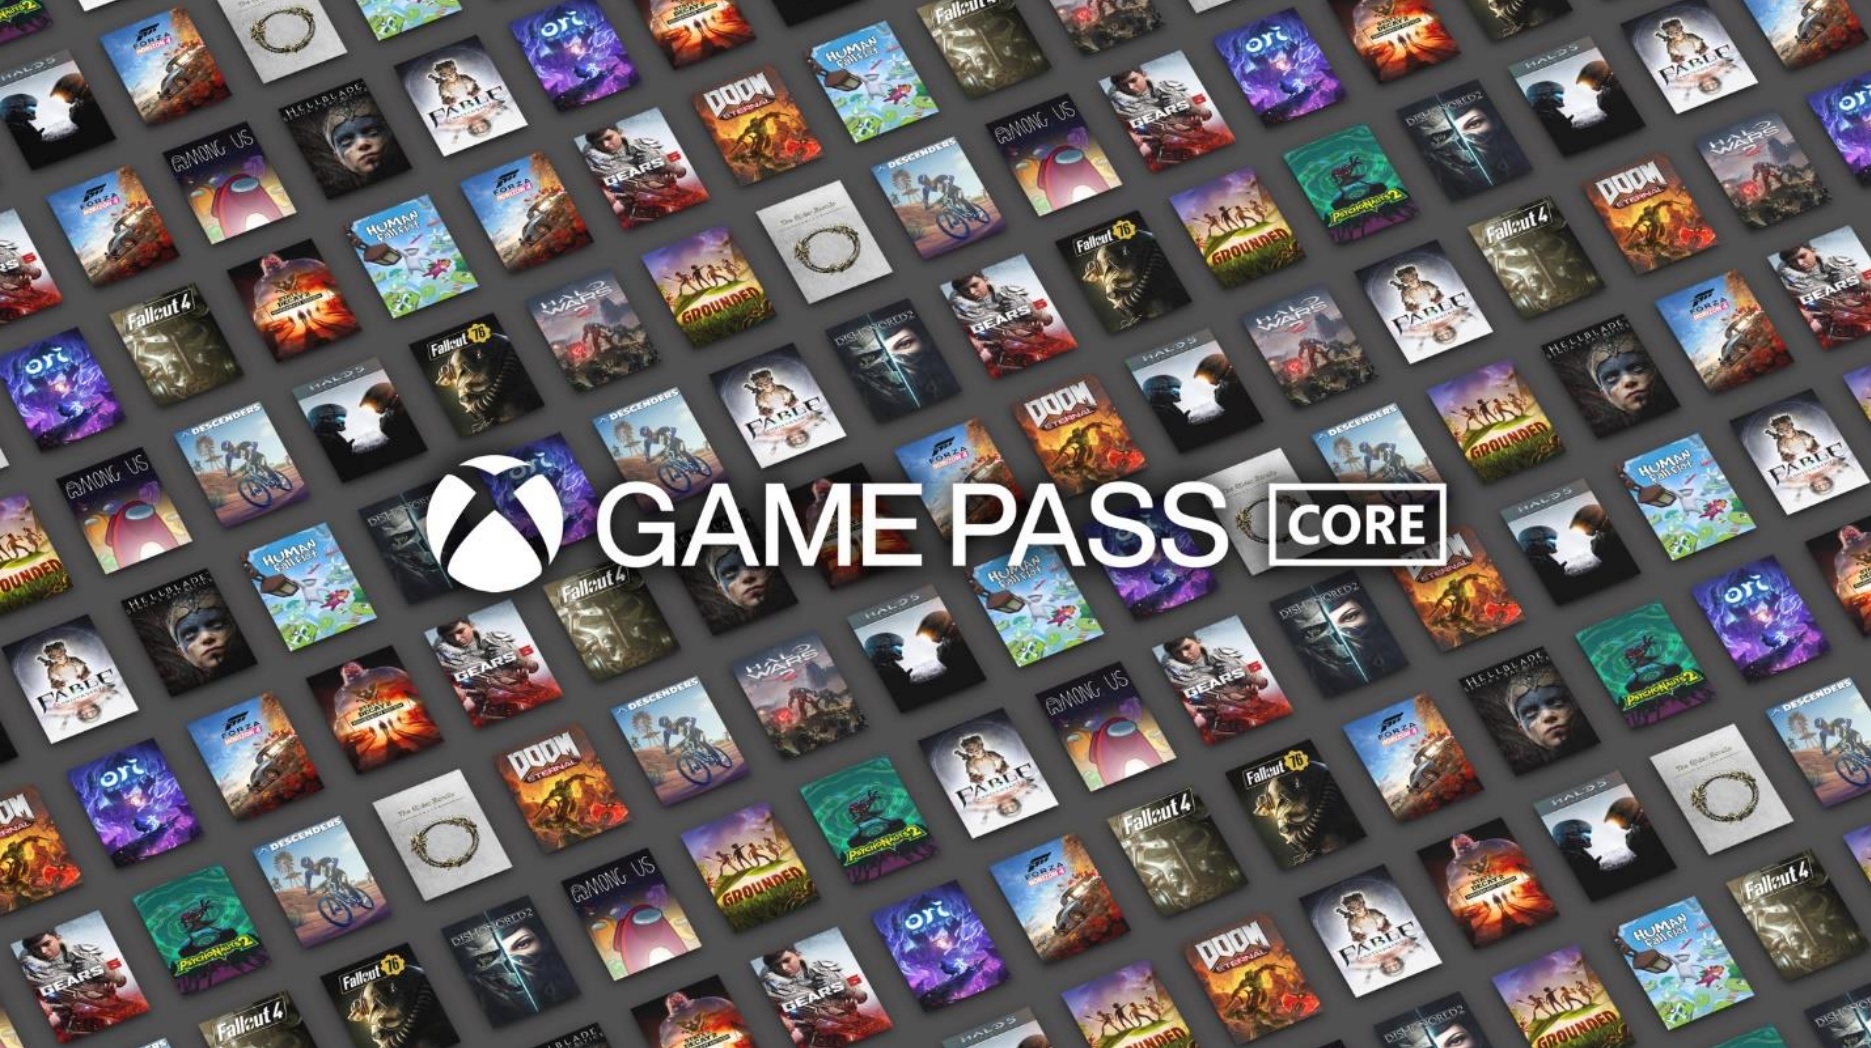 Buy cheap Xbox Game Pass Ultimate - 1 Month for new users key - lowest price